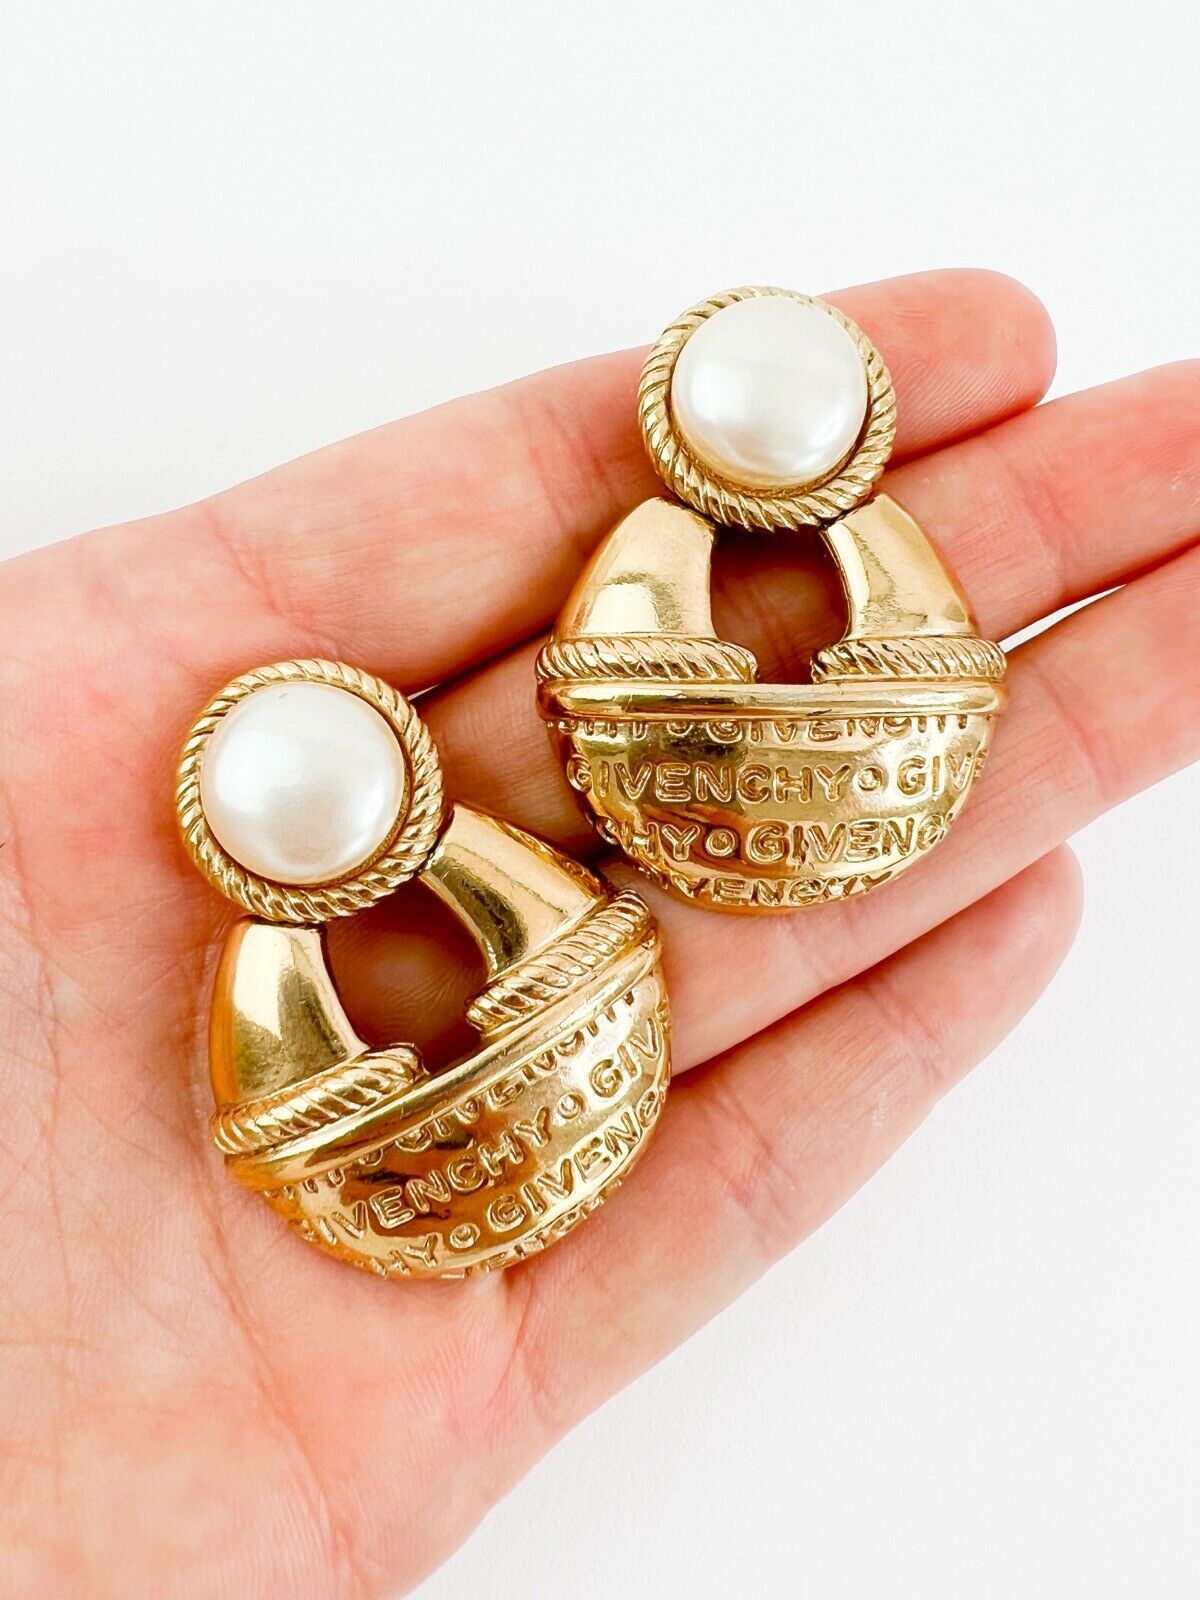 Givenchy Vintage Logo Gold Earrings Drop Pearl Women Jewelry Gold